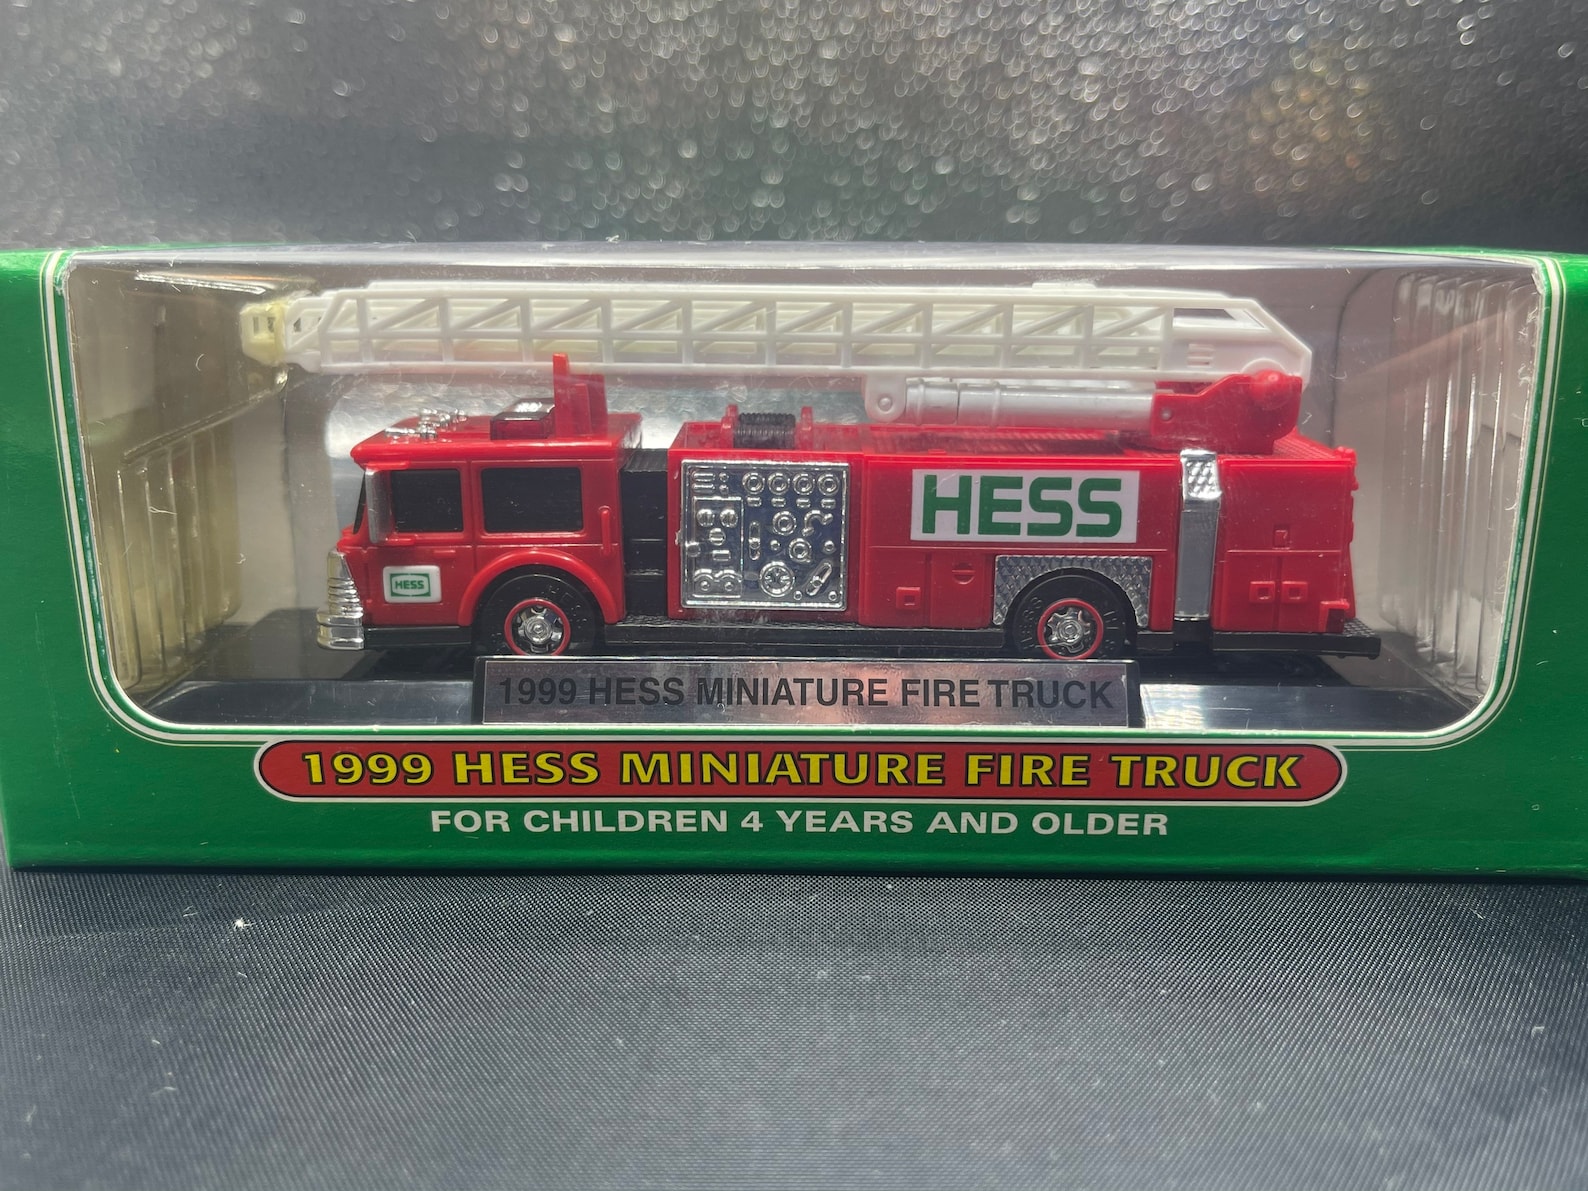 1999 Hess Miniature Fire Truck. Very Cute for Ages 4 Years | Etsy